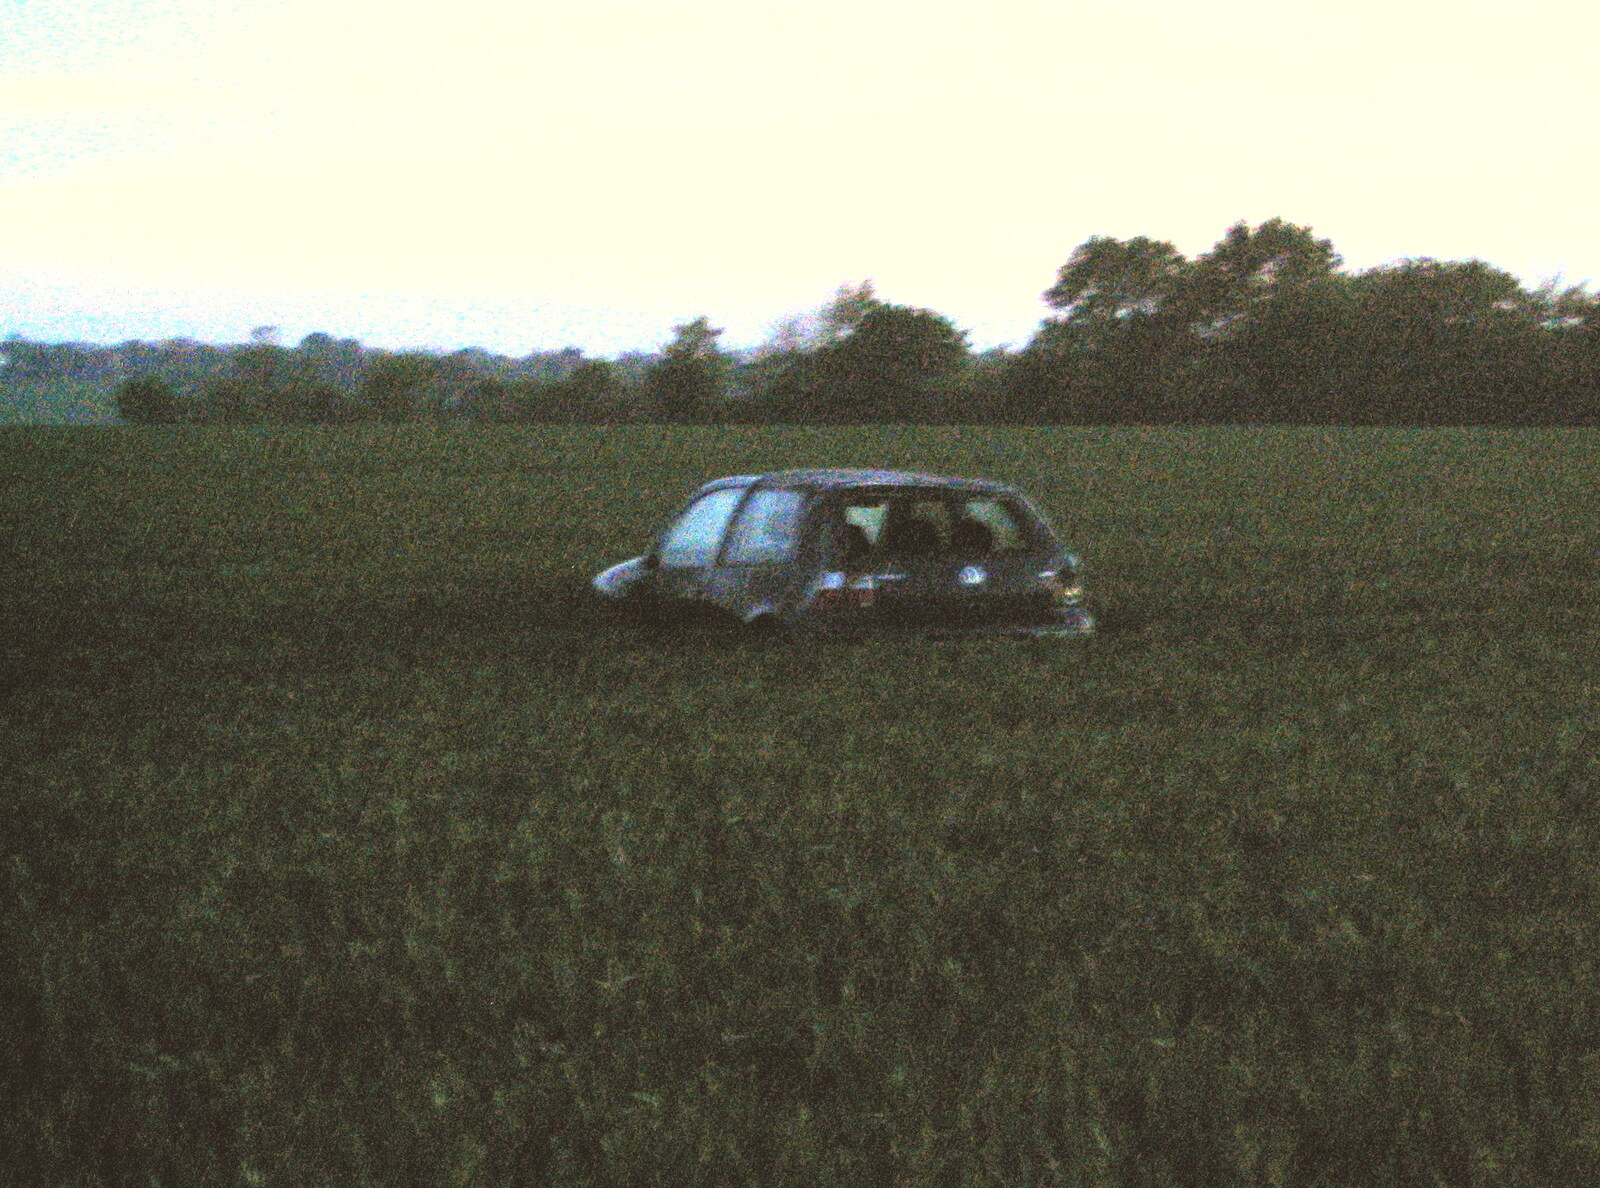 There's a VW Golf in a field of wheat from BSCC Bike Rides and Fun With Diffraction Gratings, Gissing and Diss - 26th May 2005